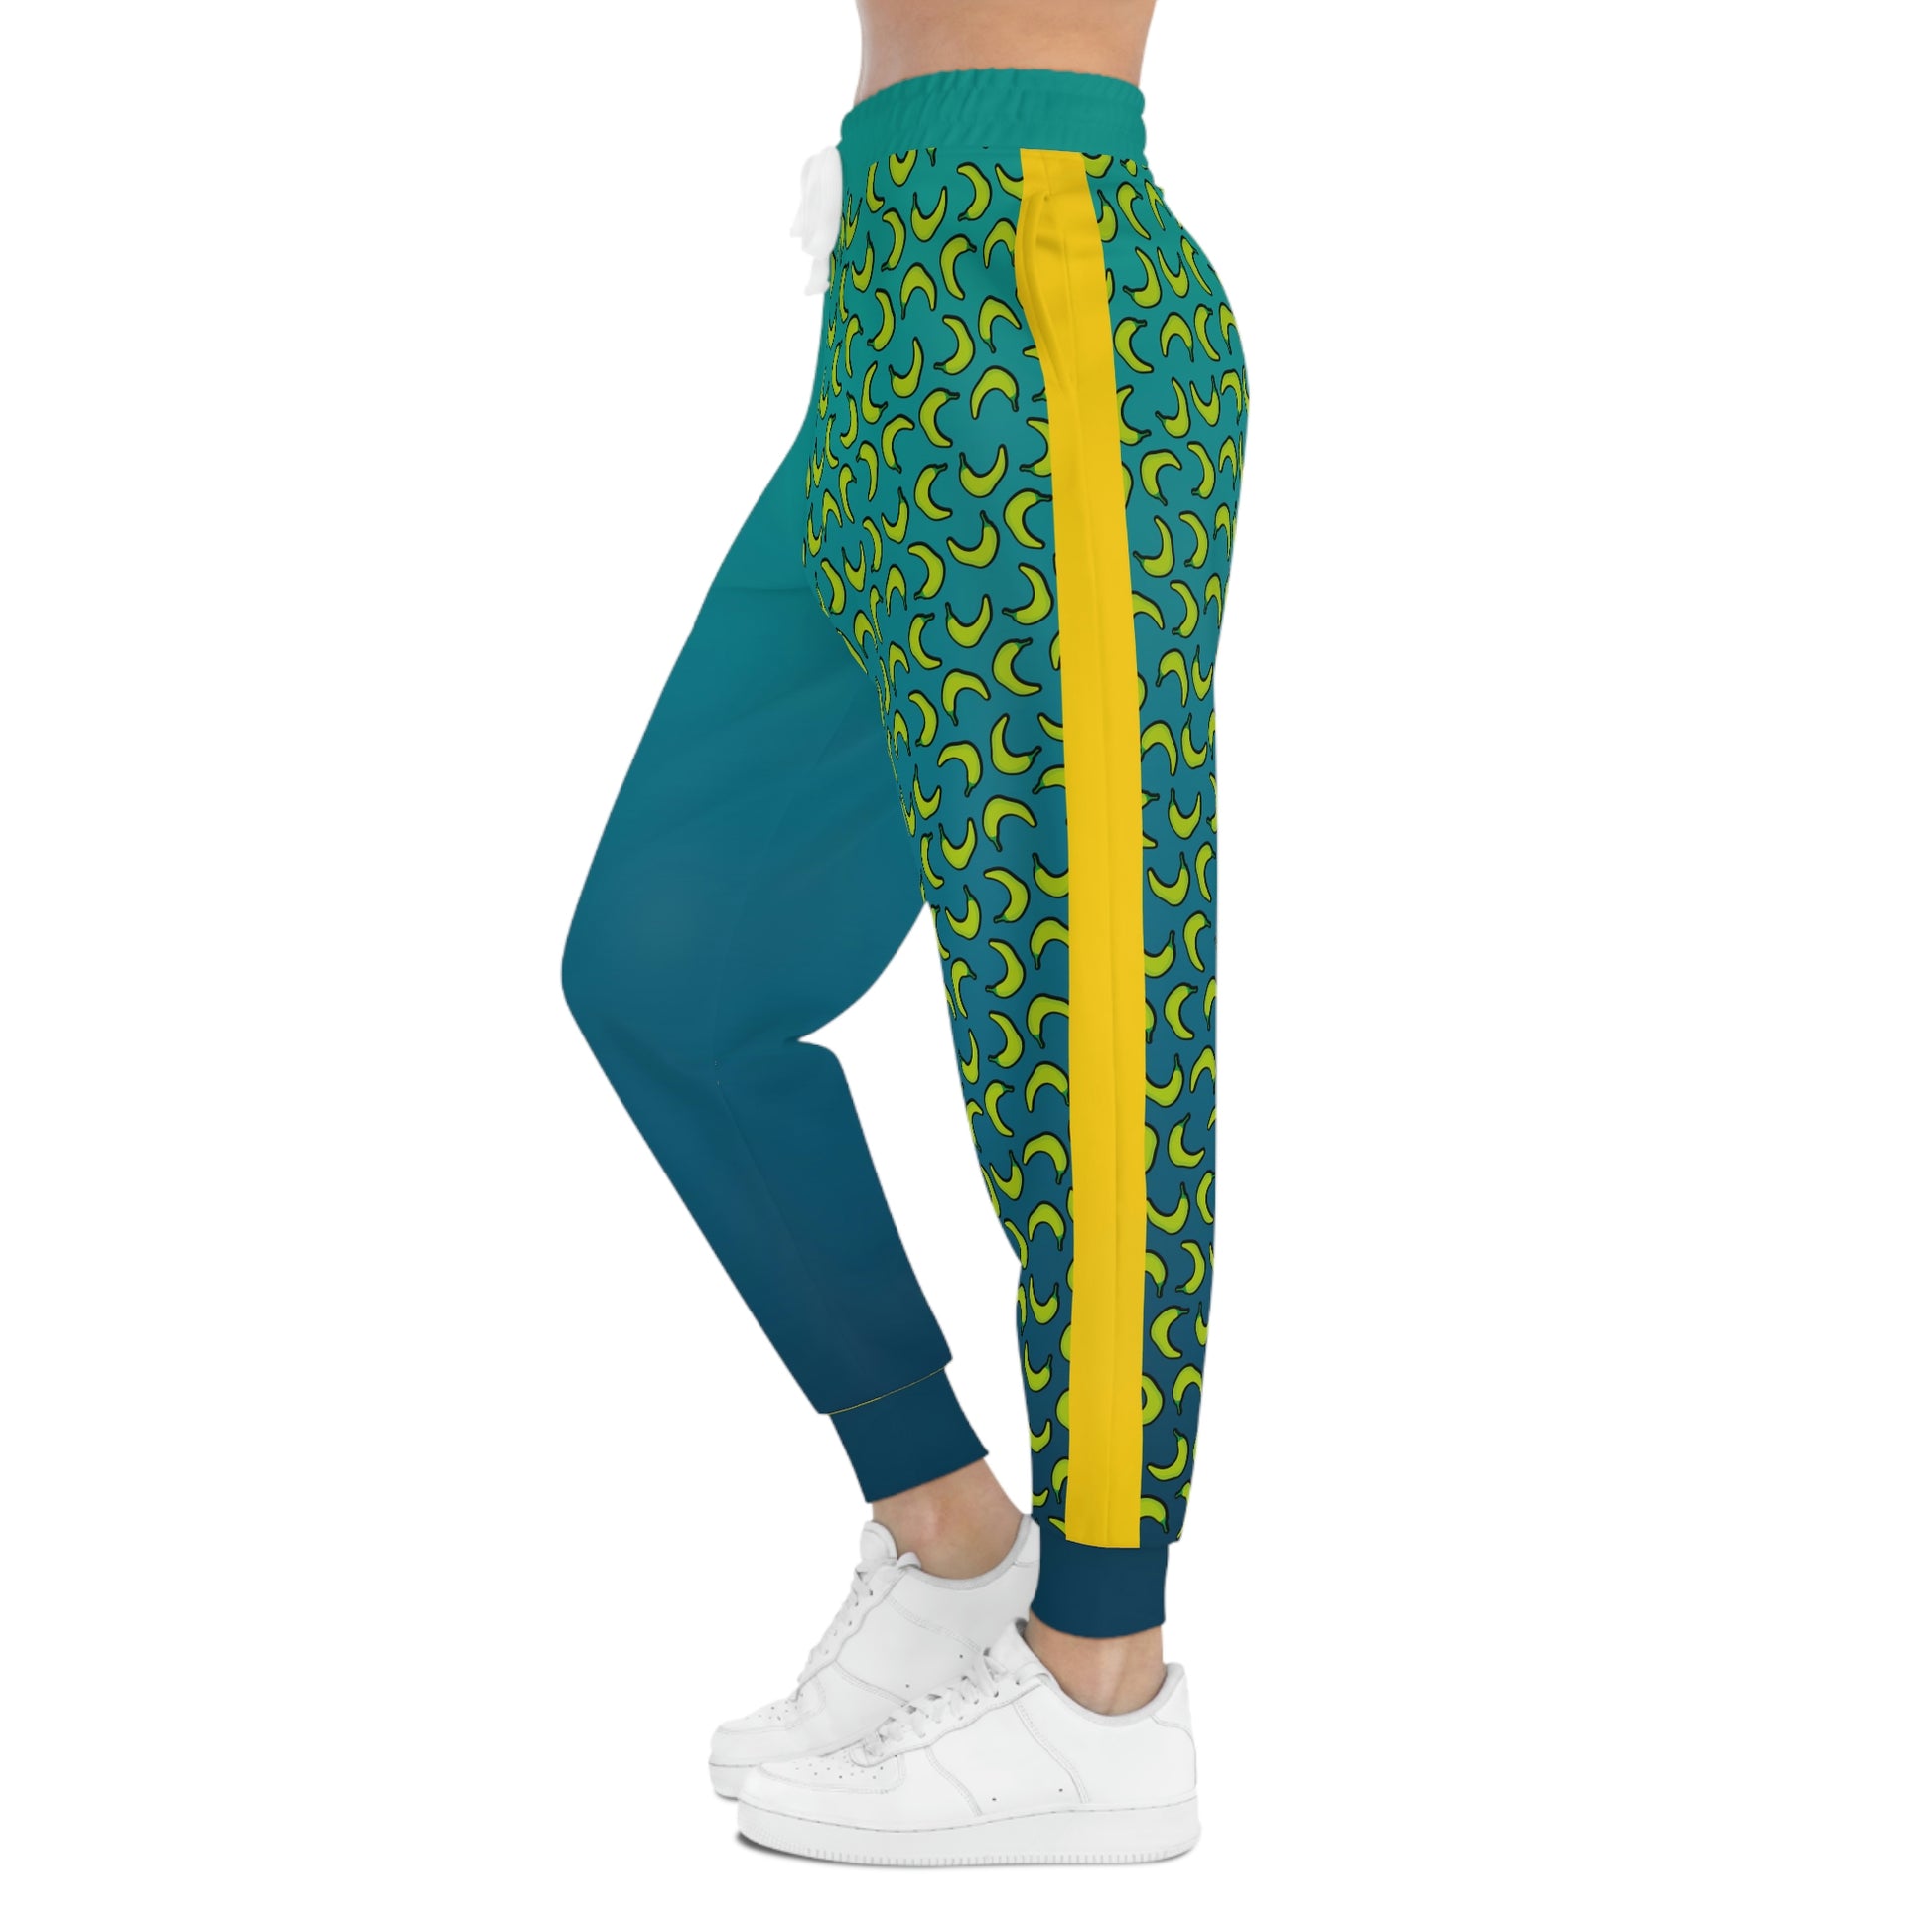 Athletic Joggers for women who consider themselves HOT! – PROUD TO BE ME  fashion